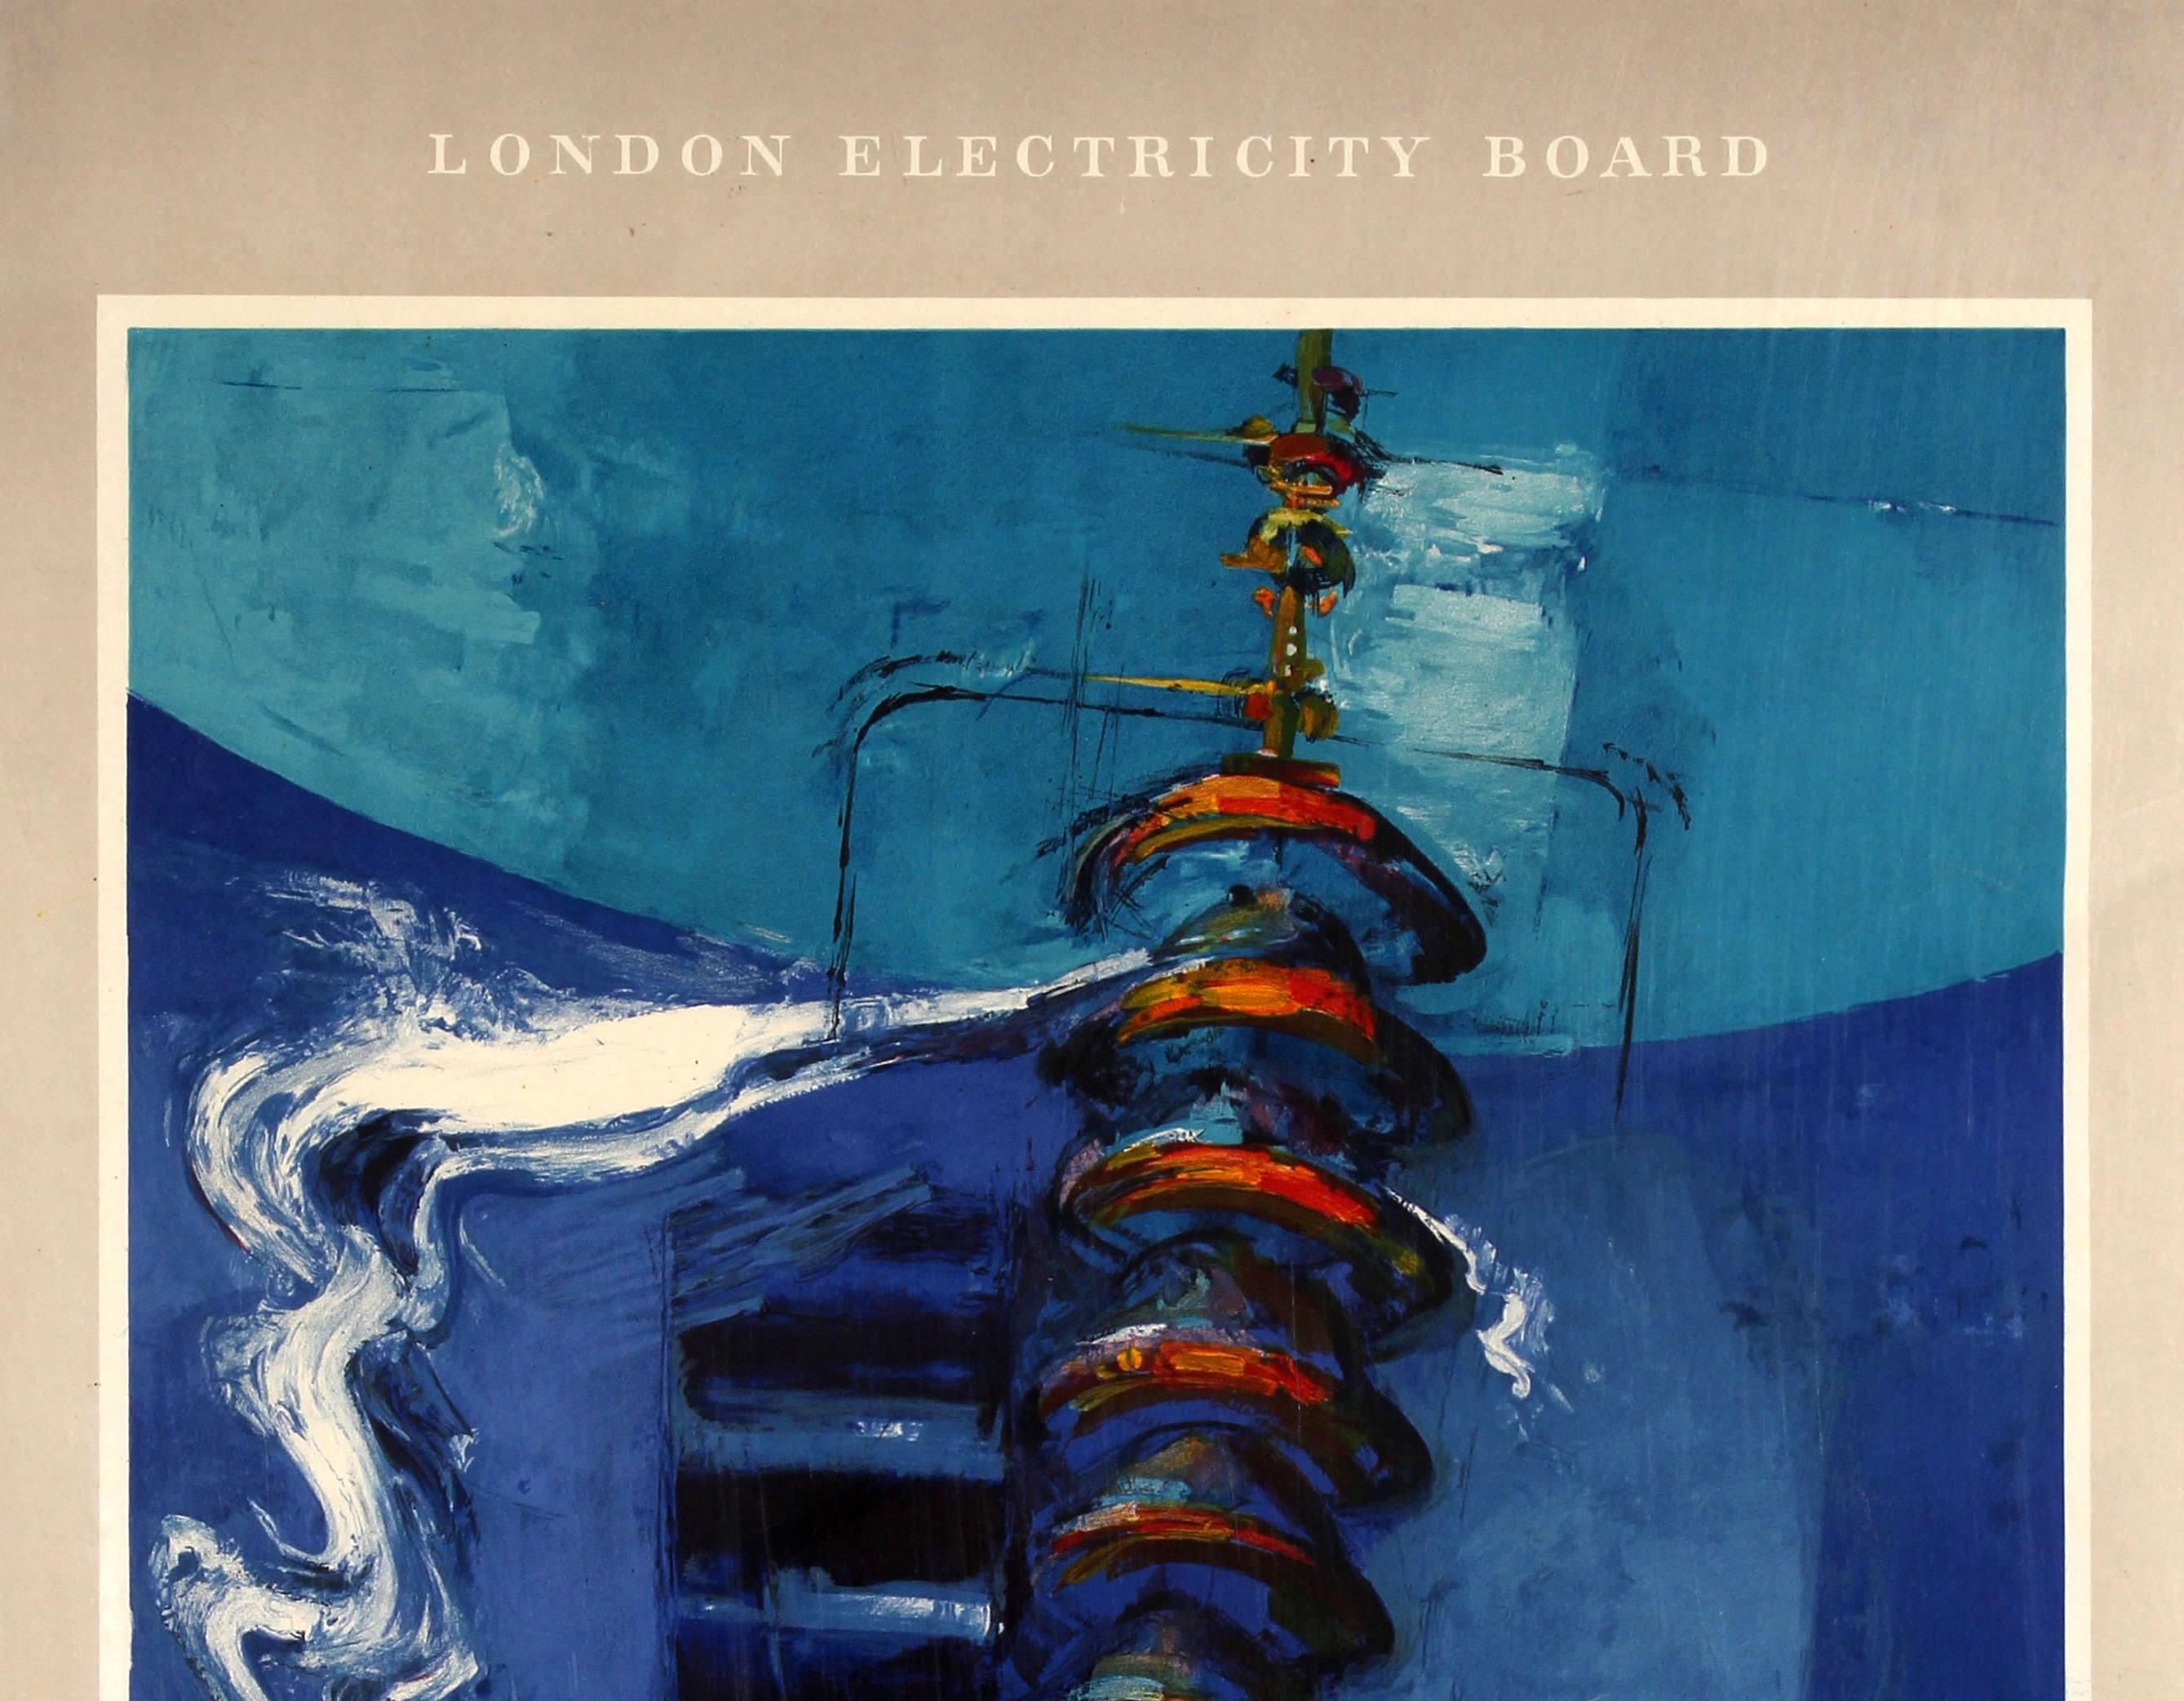 Original Vintage London Electricity Board Poster The Power Of London - Insulator - Print by Donald Hamilton Fraser